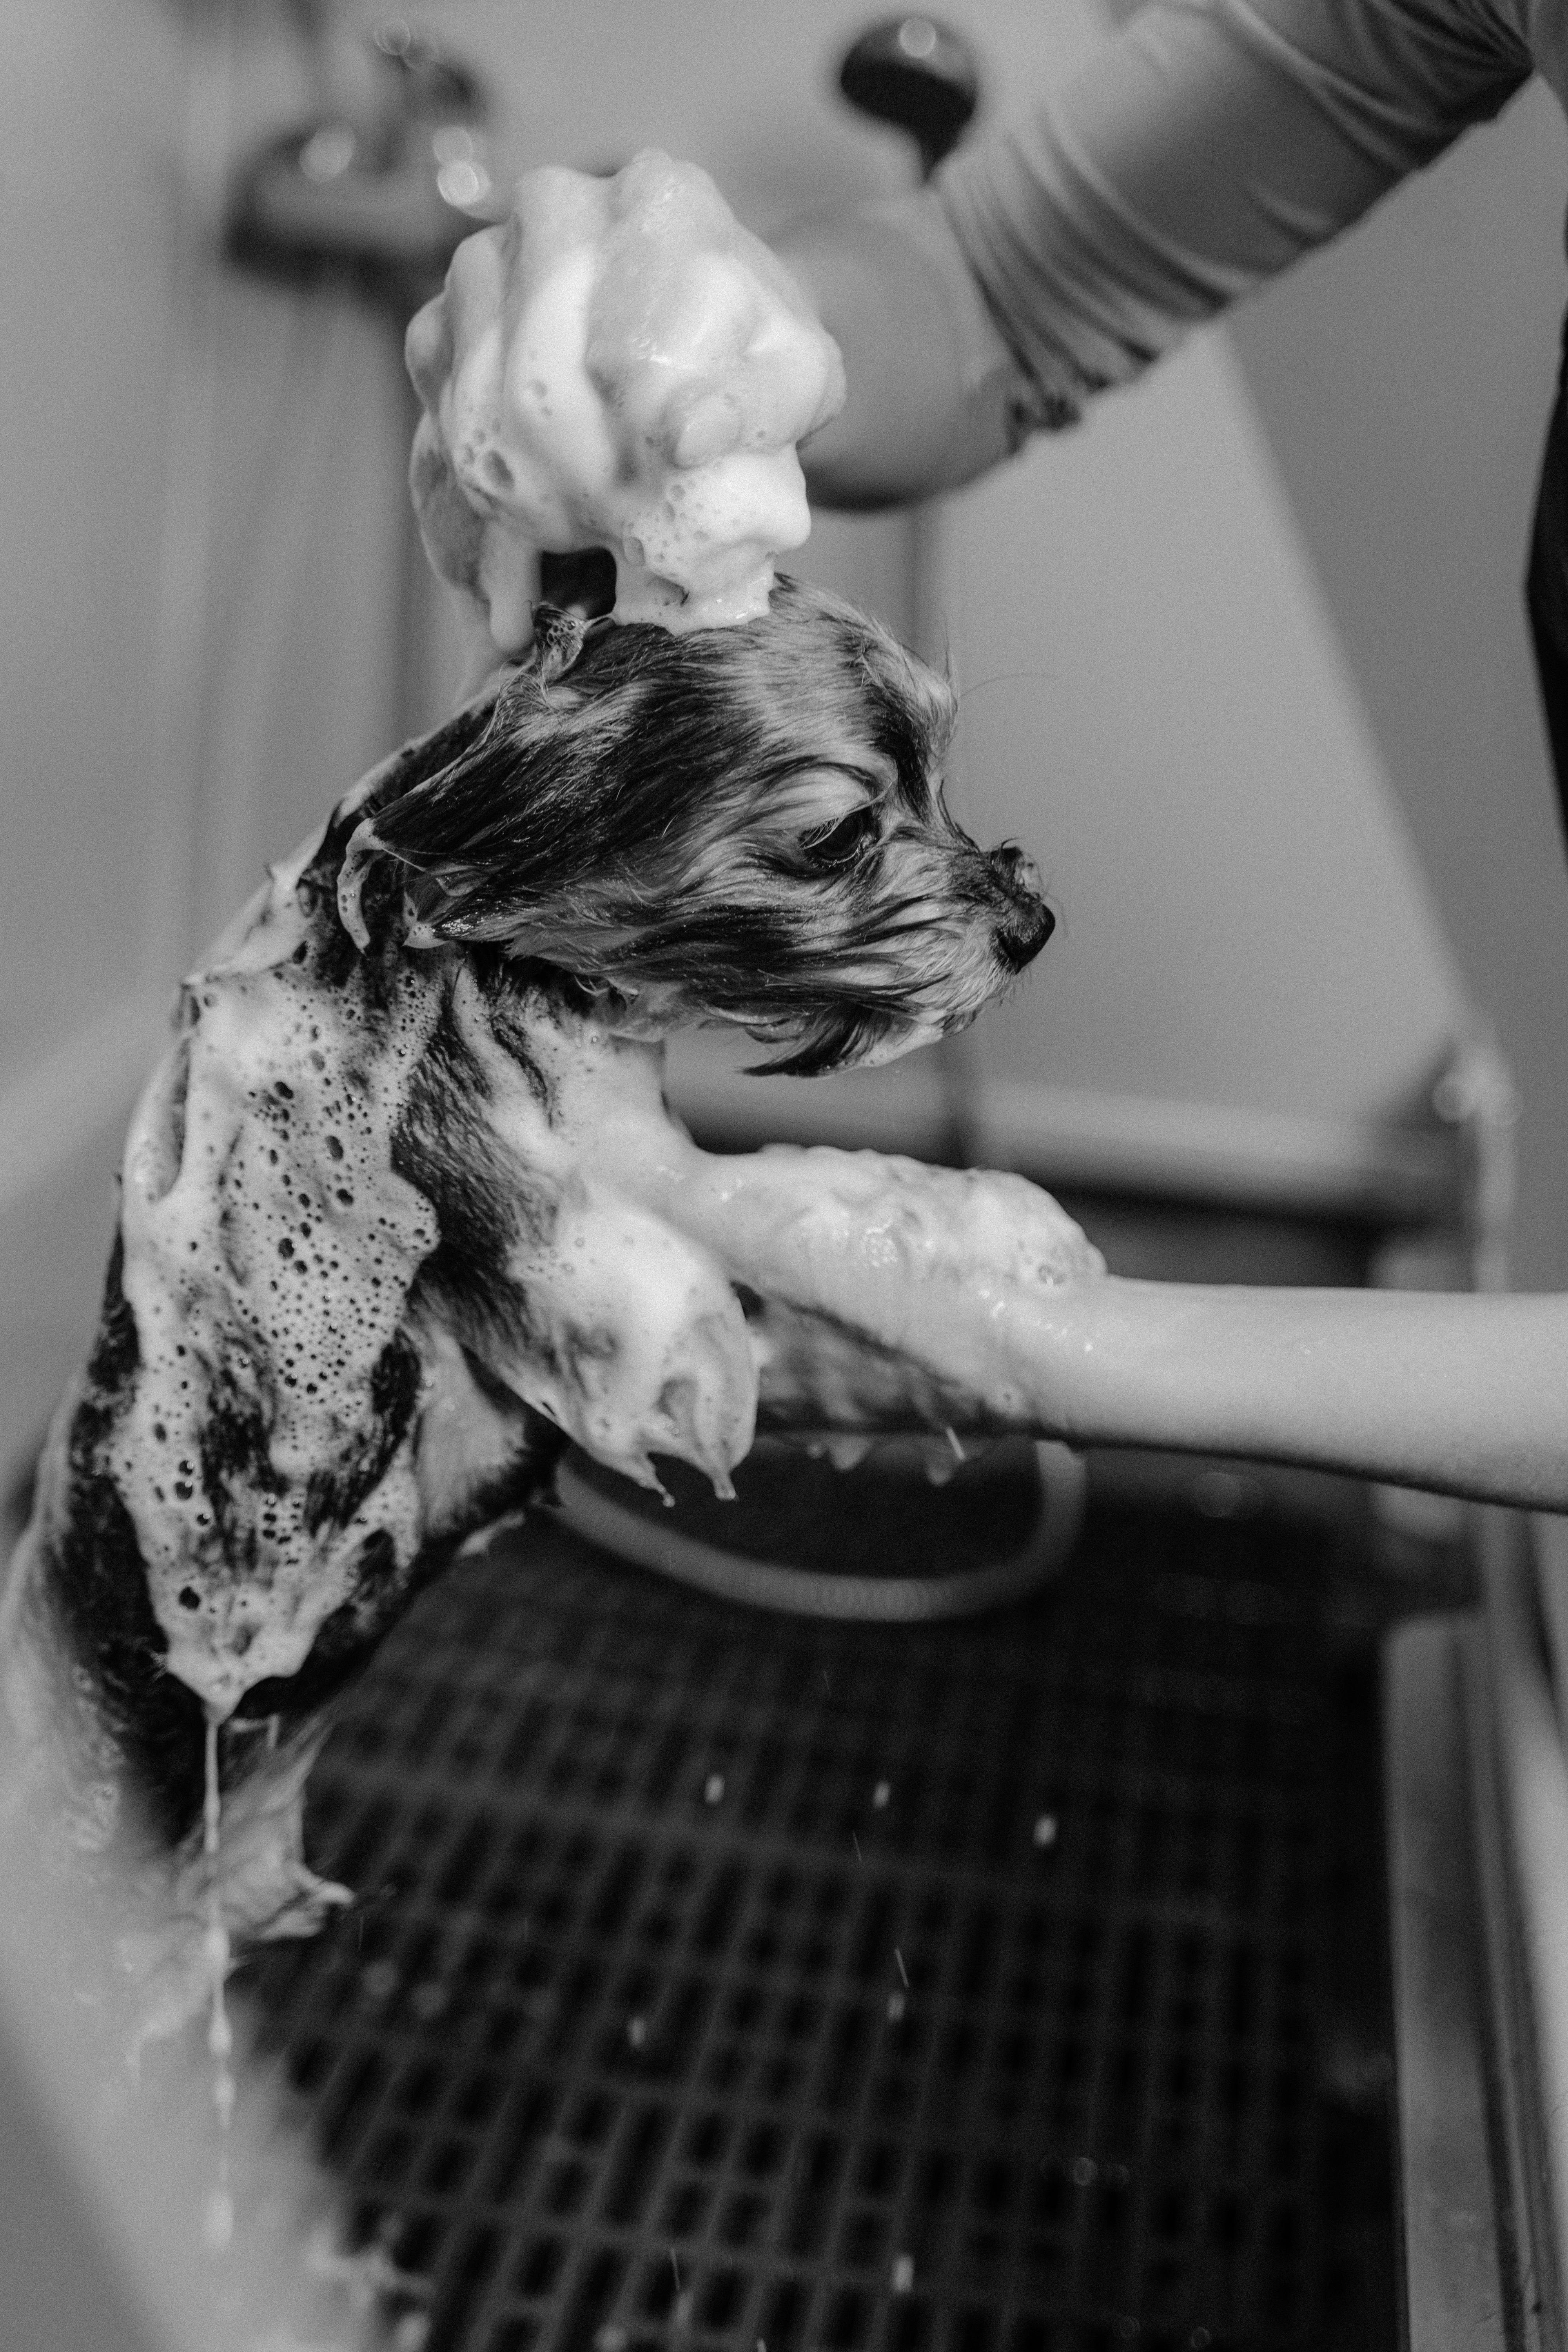 grayscale photography of person shampooing dog